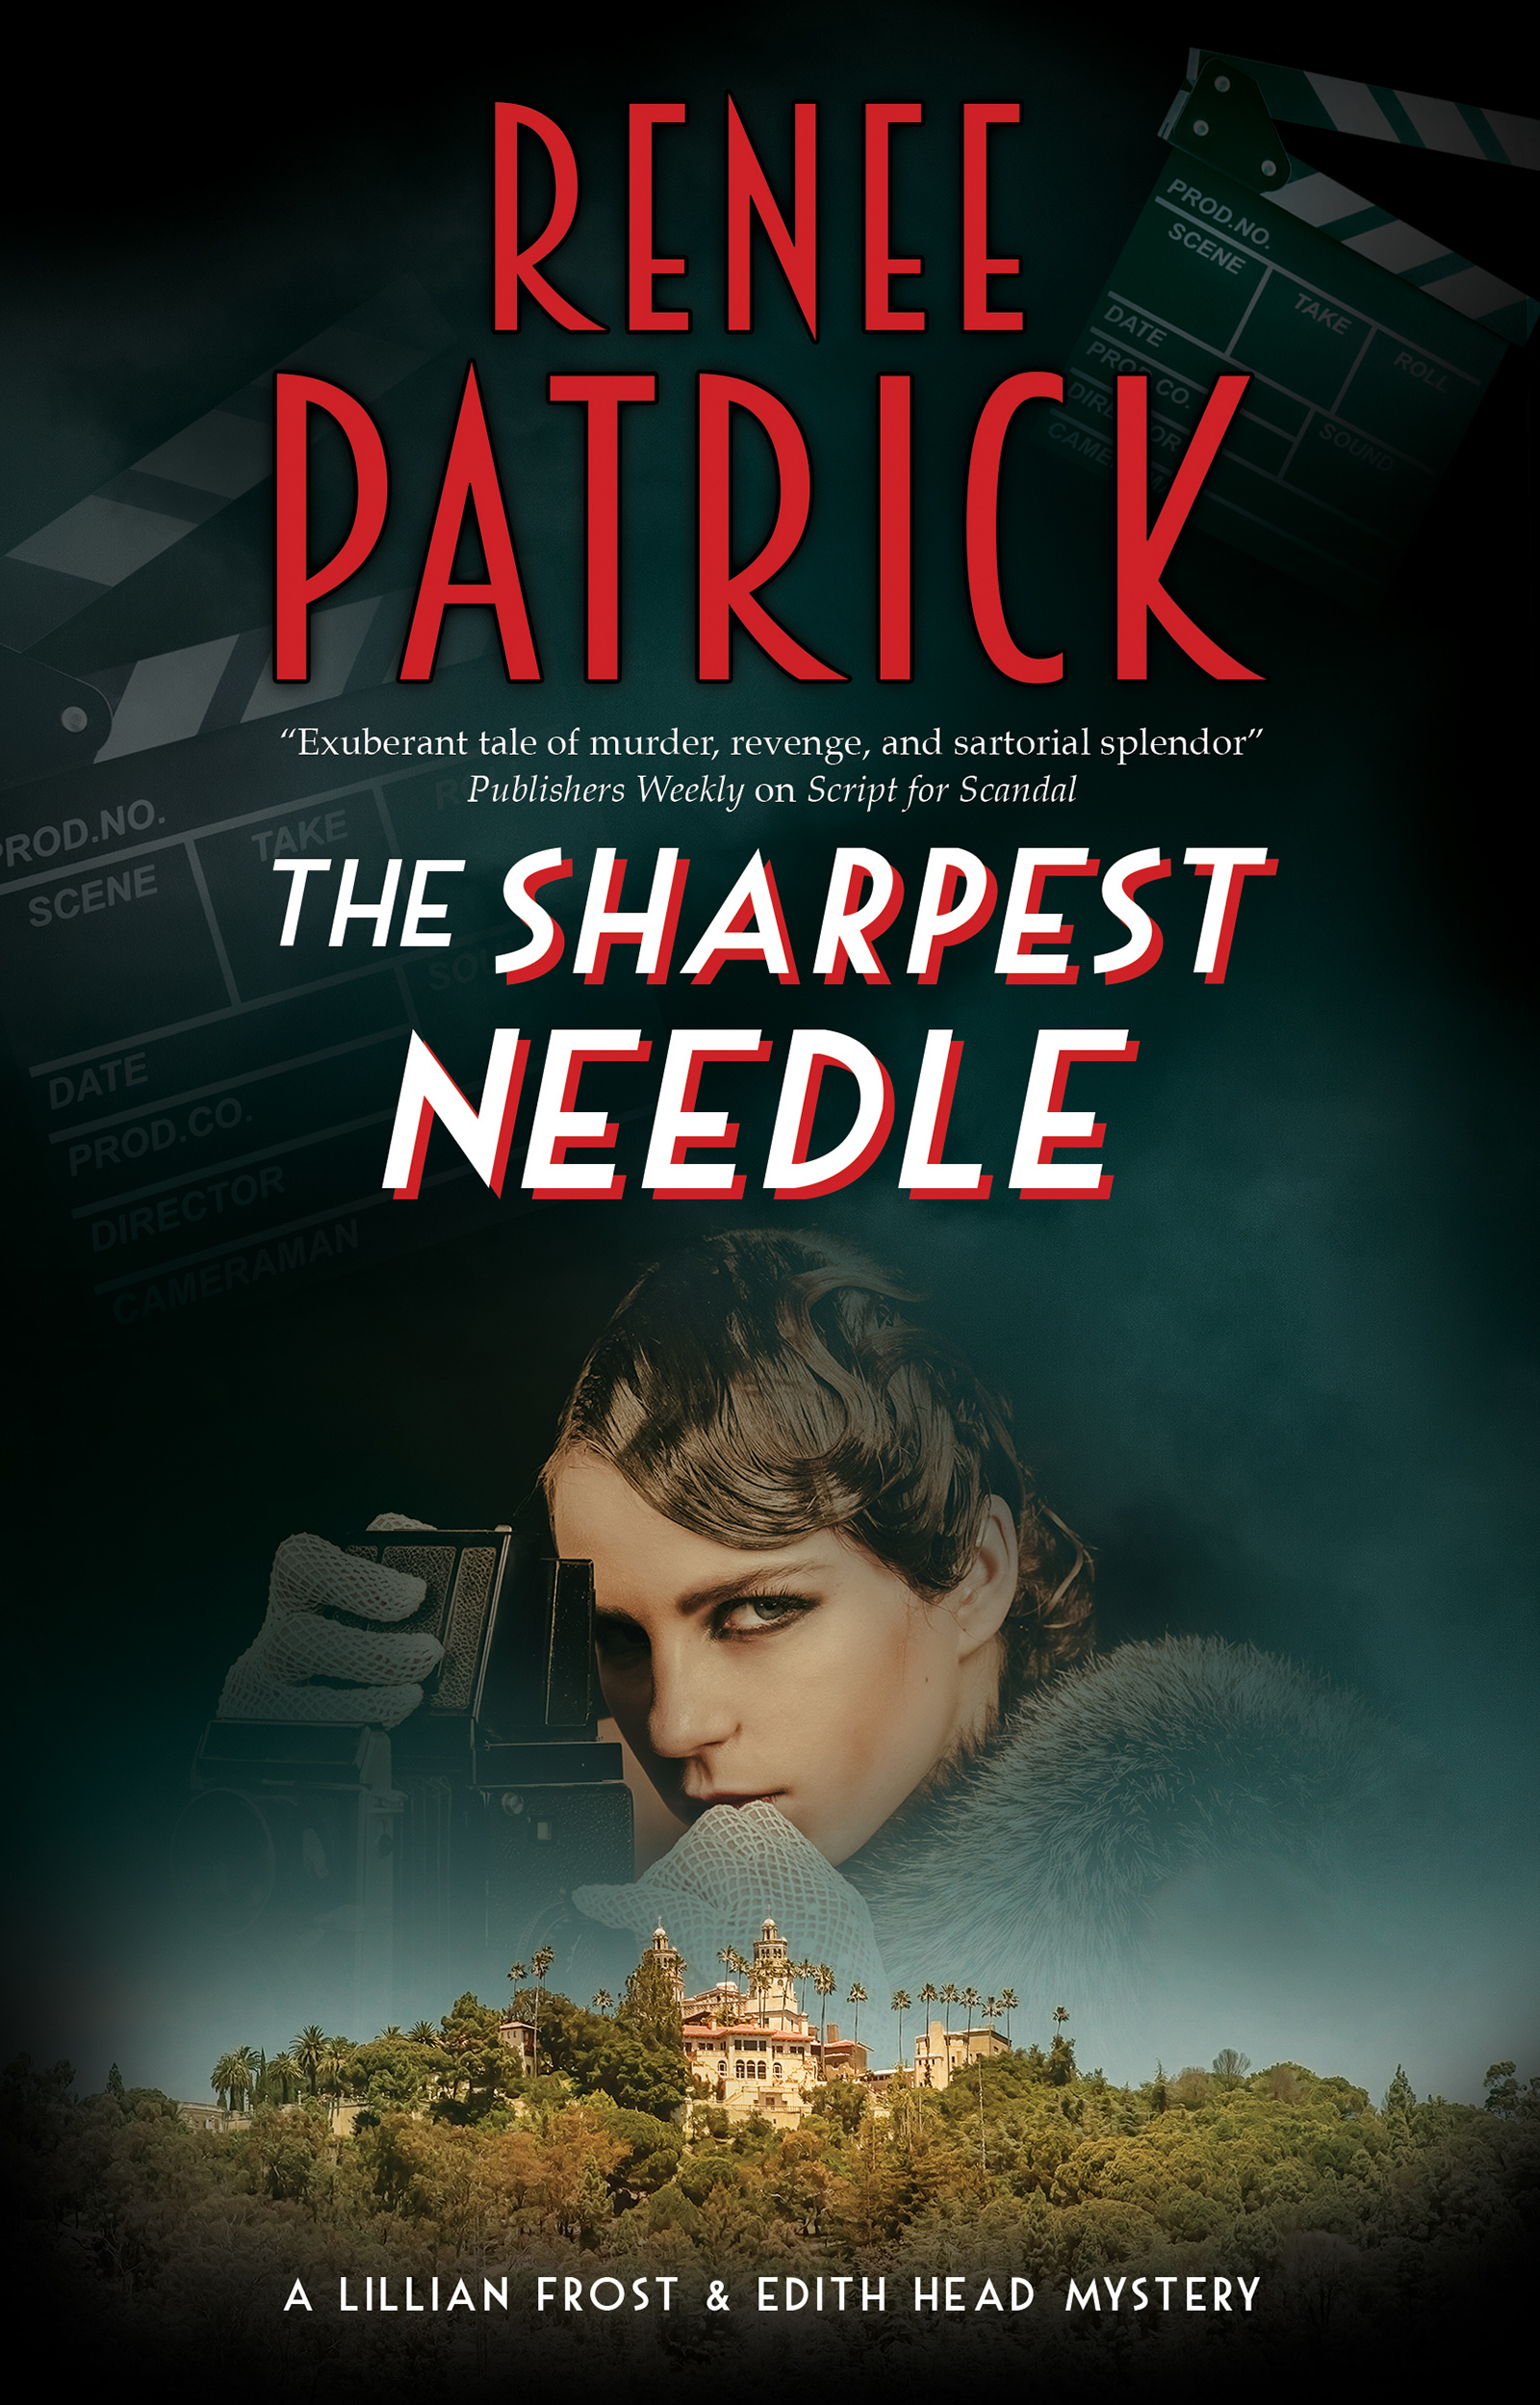 More Classic Hollywood Intrigue from Renee Patrick